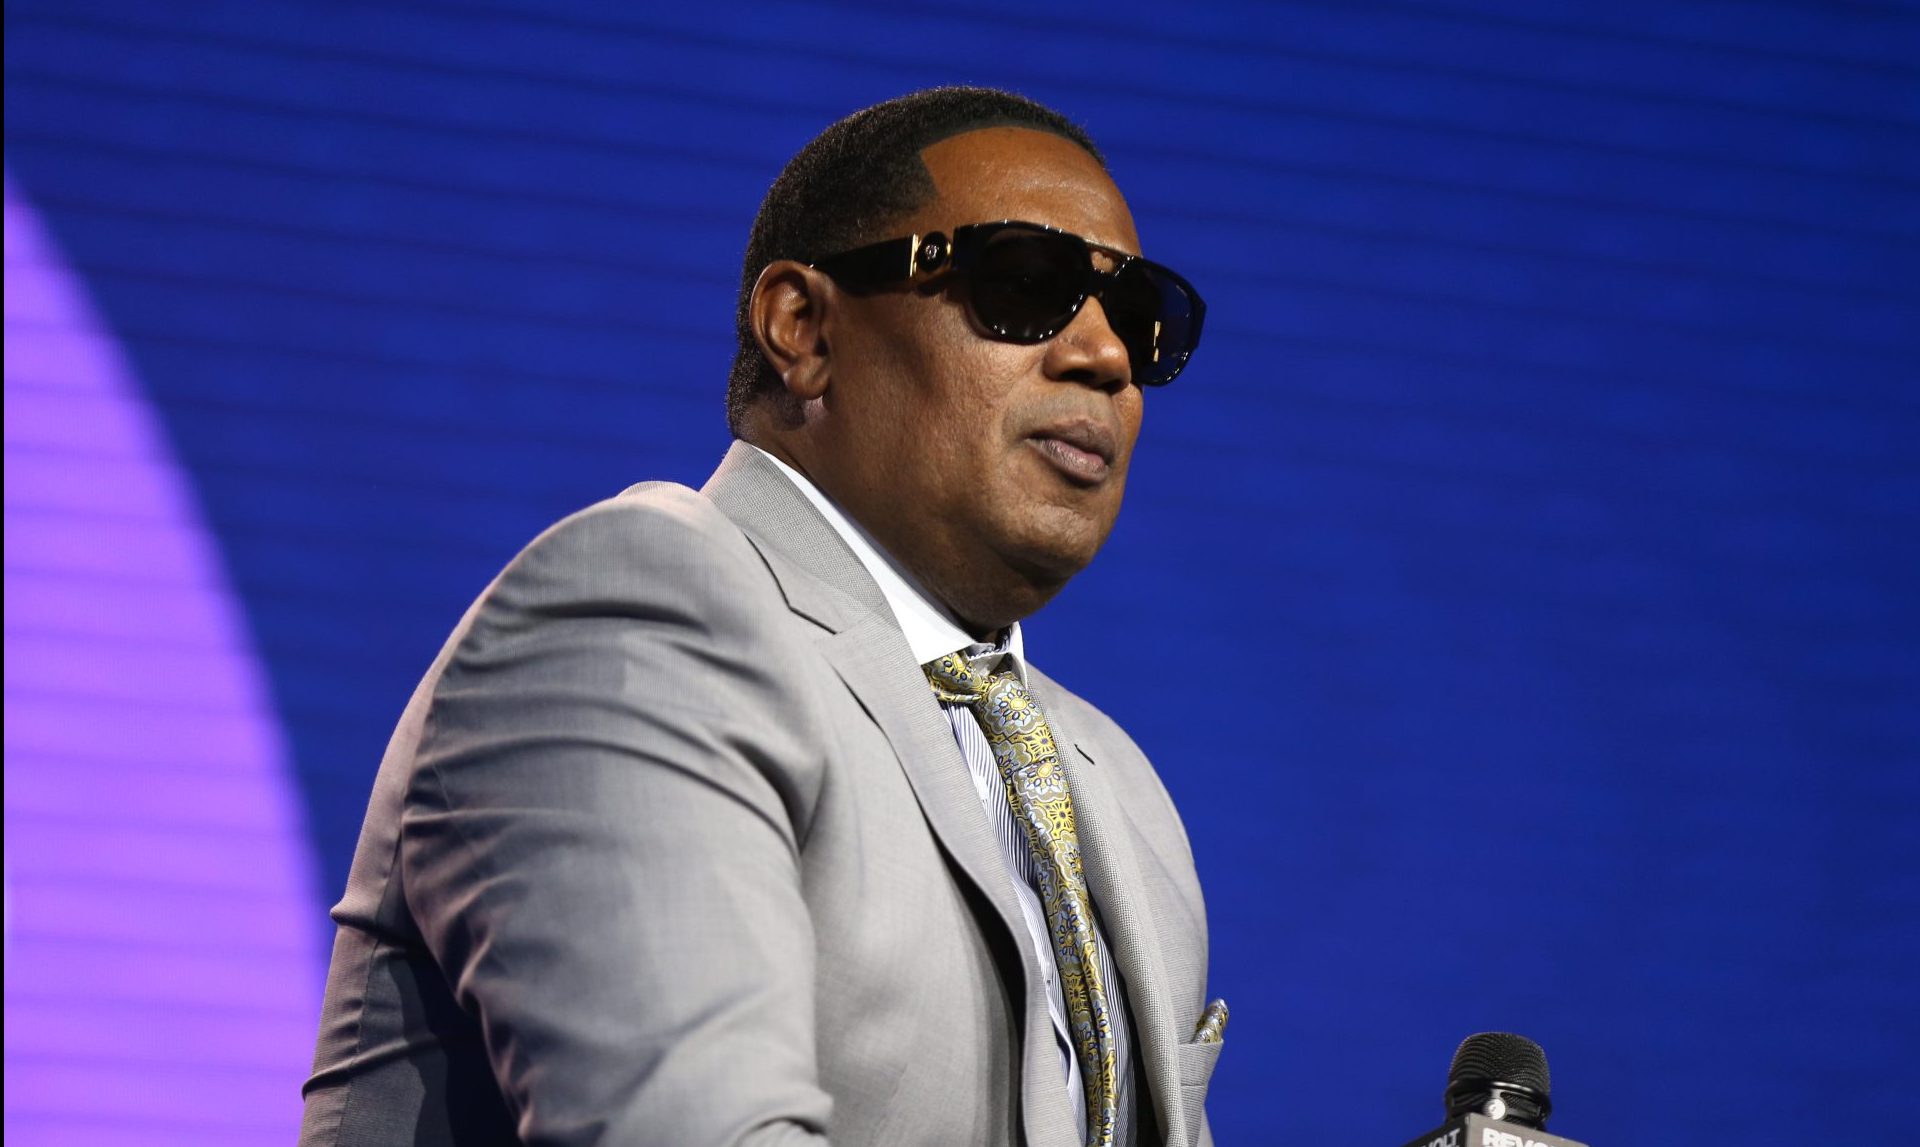 (Video) Master P Says Going To His Daughter's Funeral Felt Like His Burial